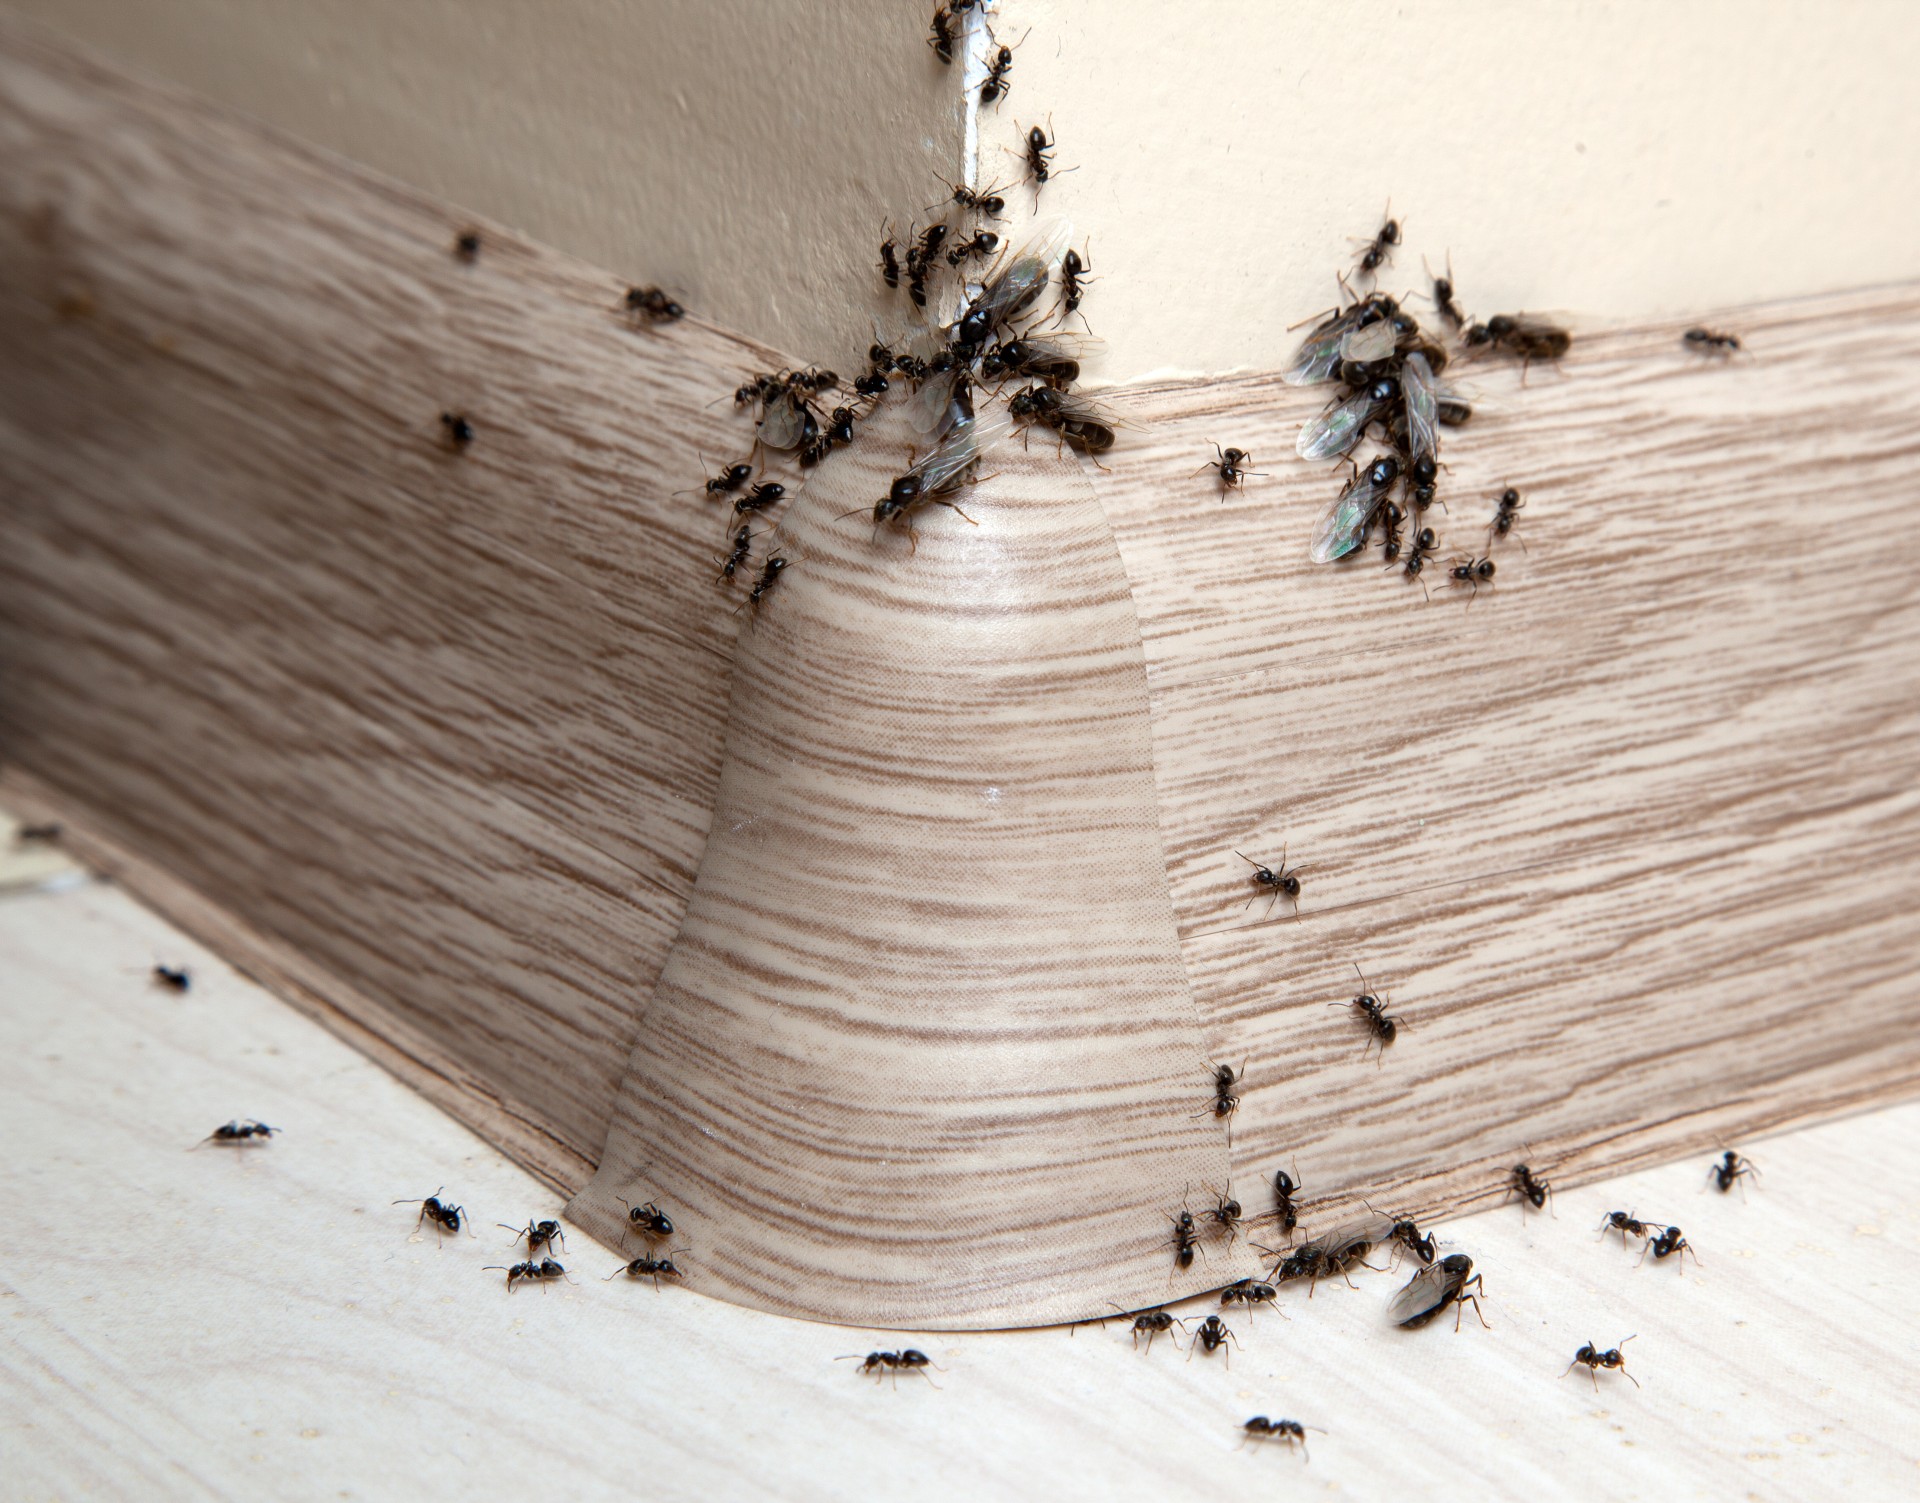 Ant Infestation, Pest Control in Shoreditch, E2. Call Now 020 8166 9746